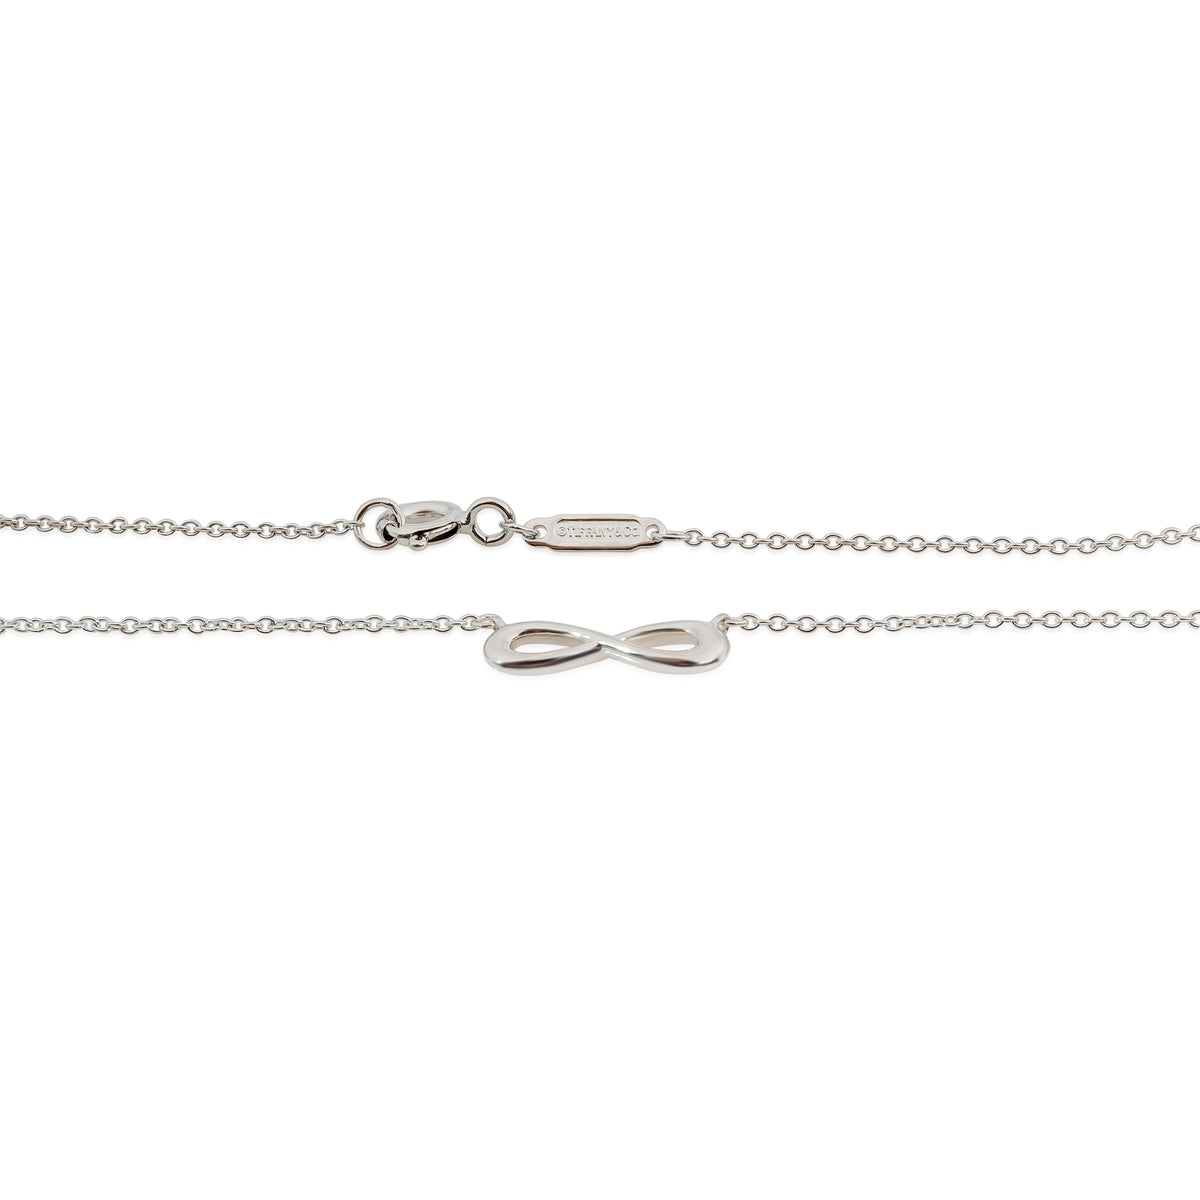 Tiffany & Co. Mini Infinity Necklace in Sterling Silver